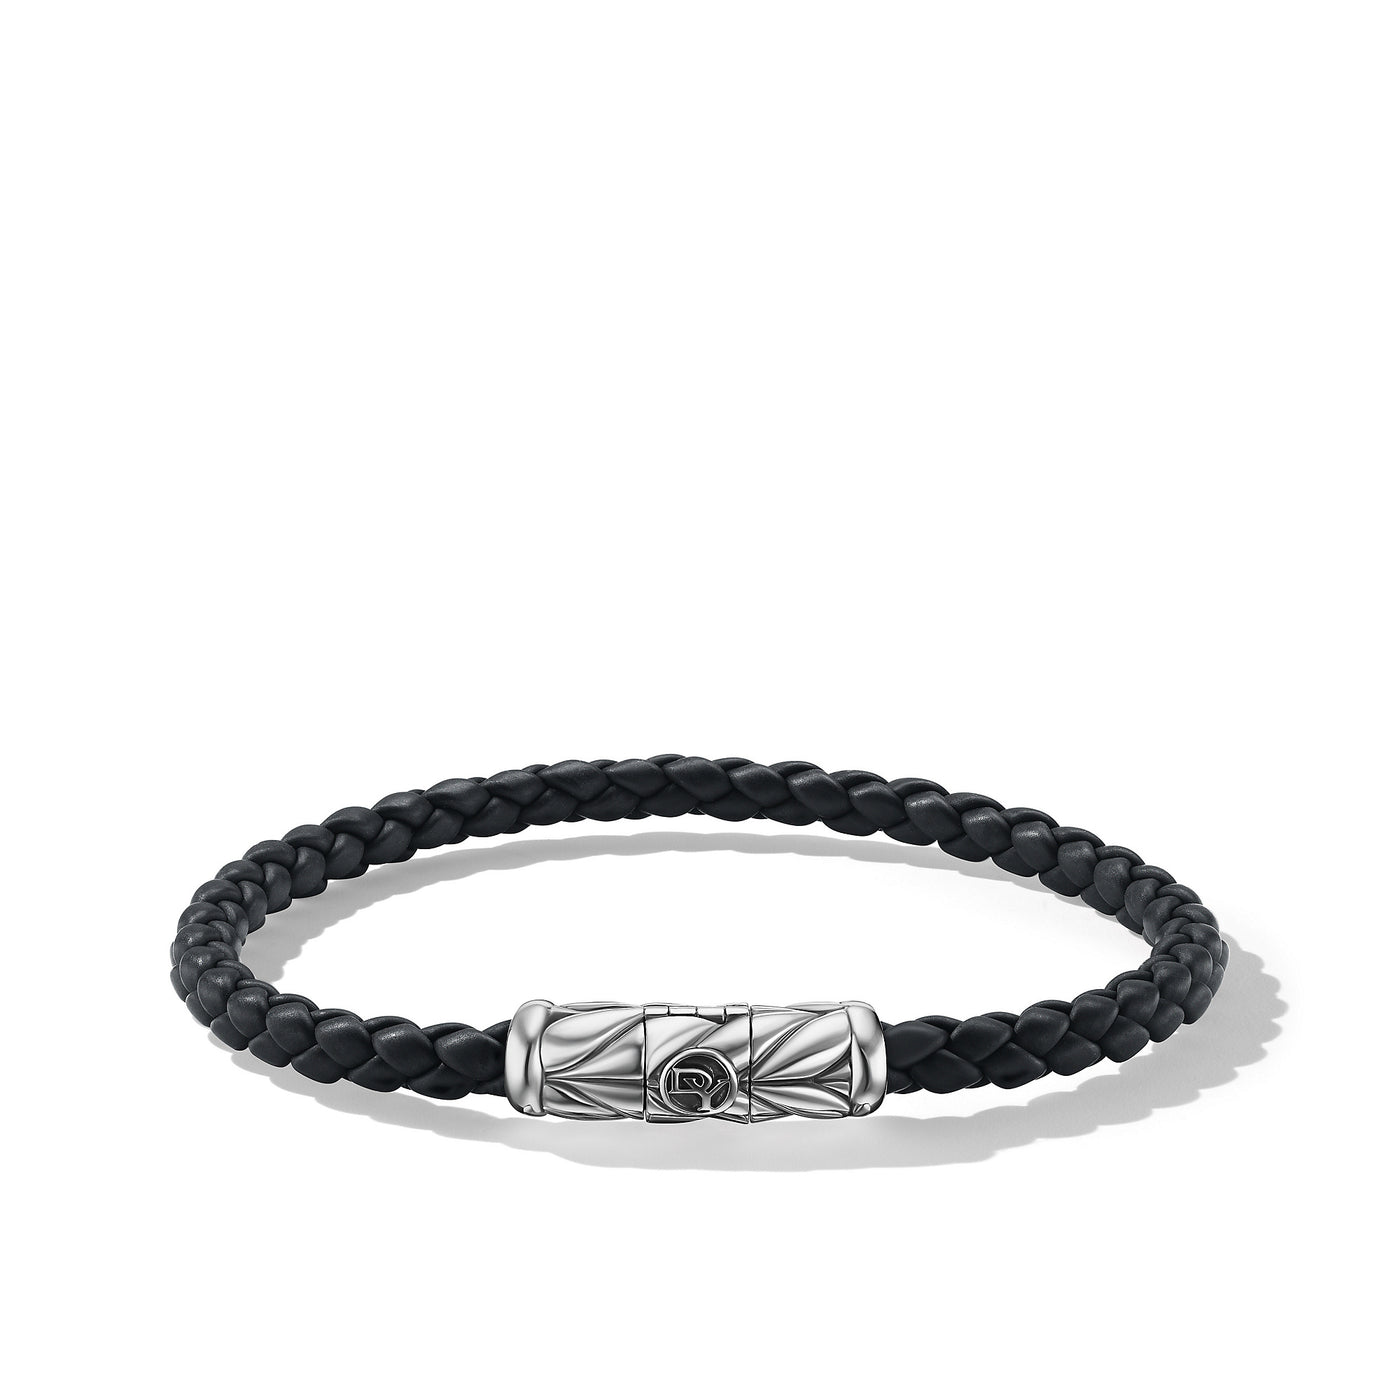 Chevron Woven Bracelet in Black Rubber and Sterling Silver\, 6mm